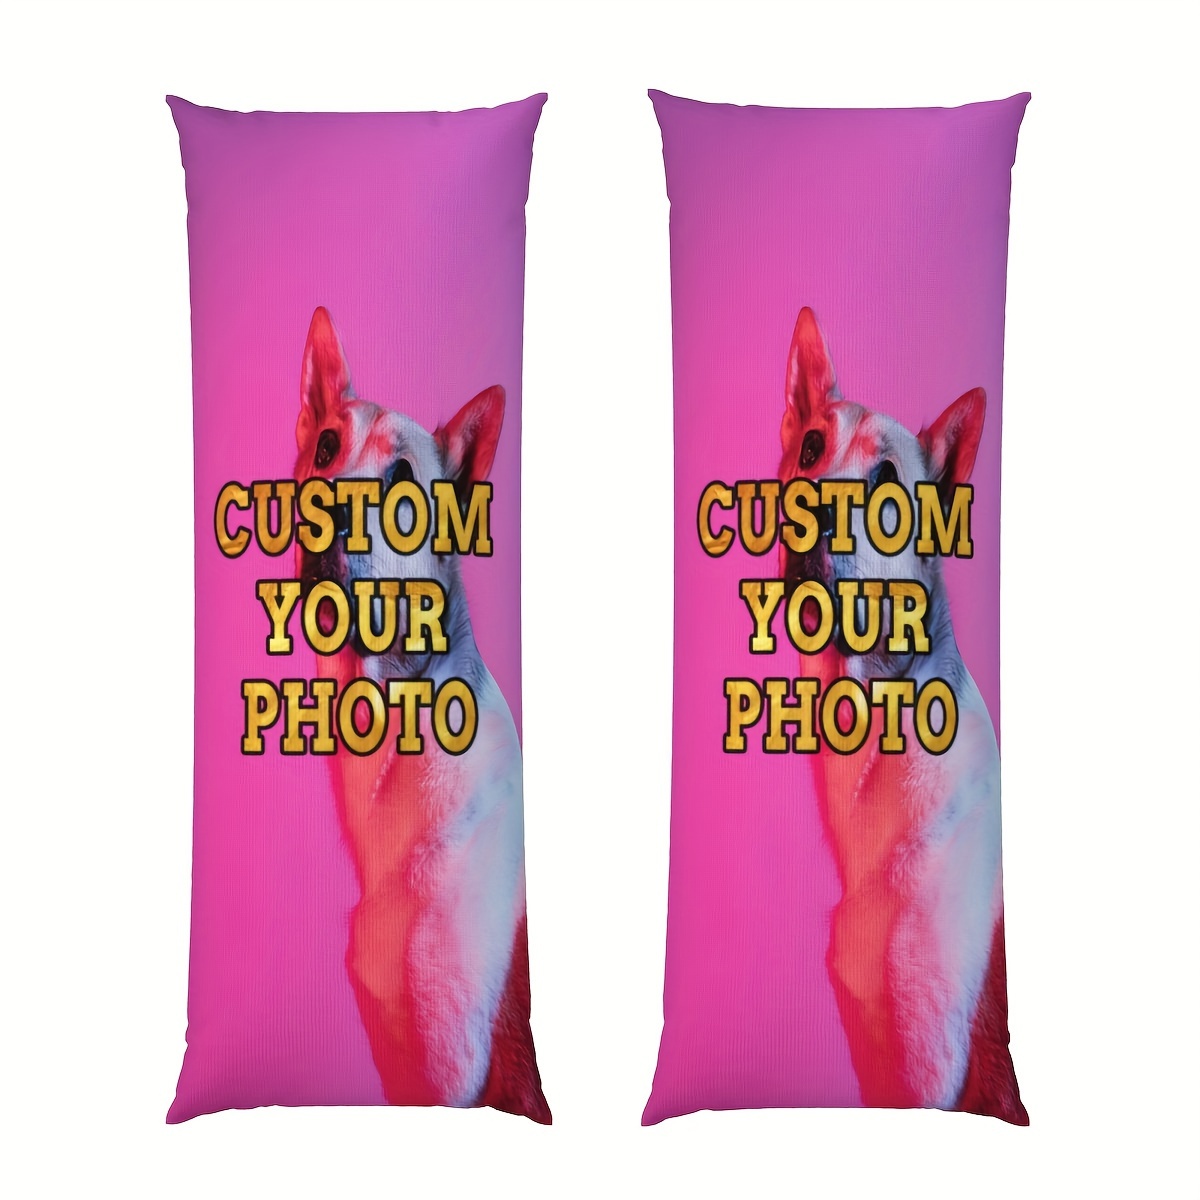 

Custom Photo Personalized Large Body Pillow Case, Double-sided Print, Bohemian Style Home Decor, 20x54 Inches - No Insert, Designed For Bedroom Comfort And Accent